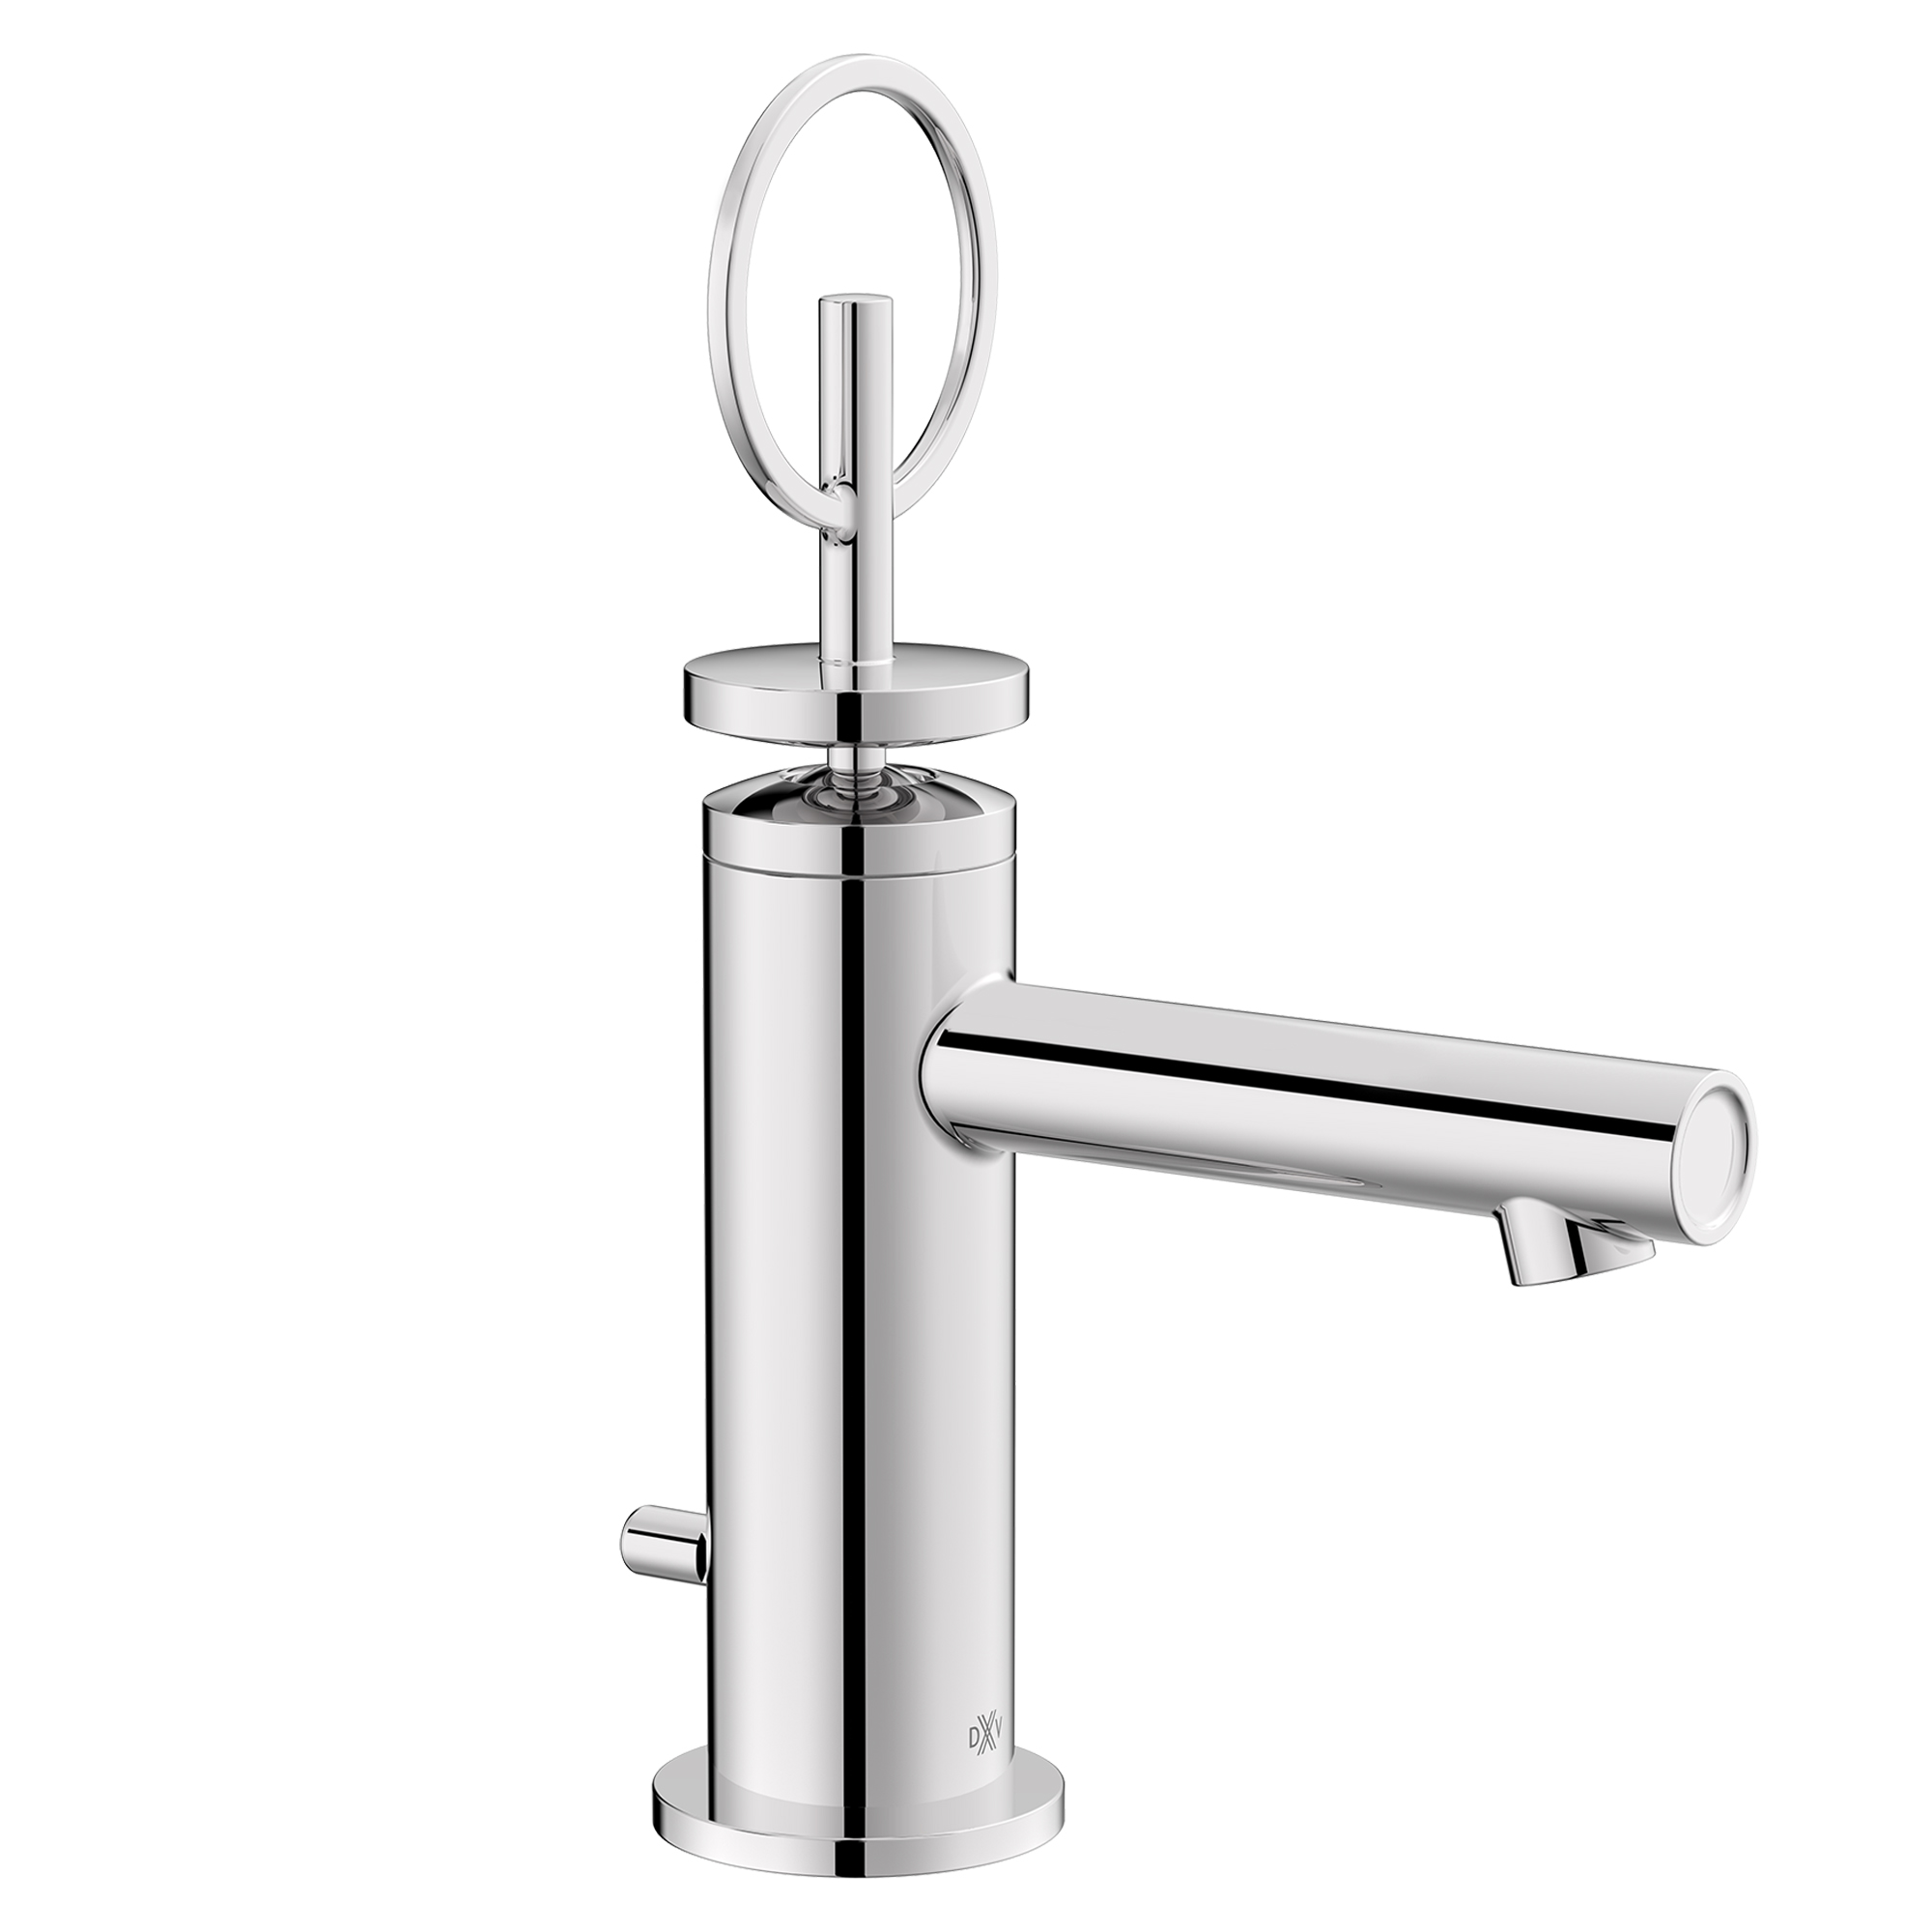 Percy Single Handle Bathroom Faucet with Indicator Markings and Loop Handle